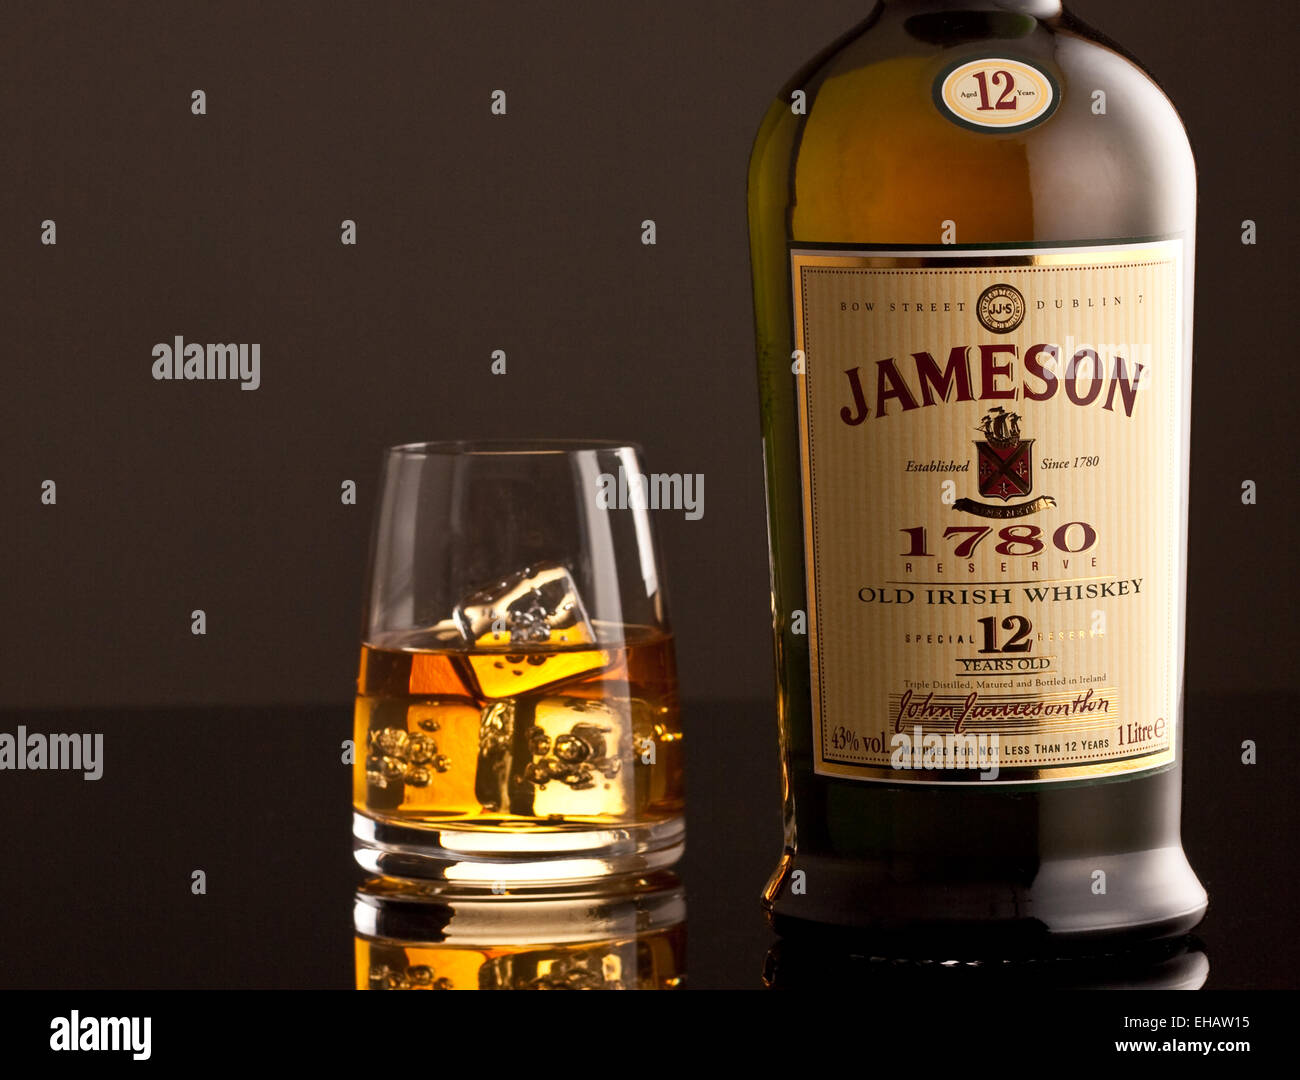 Jameson Whiskey bottle and glass with ice cubes Stock Photo